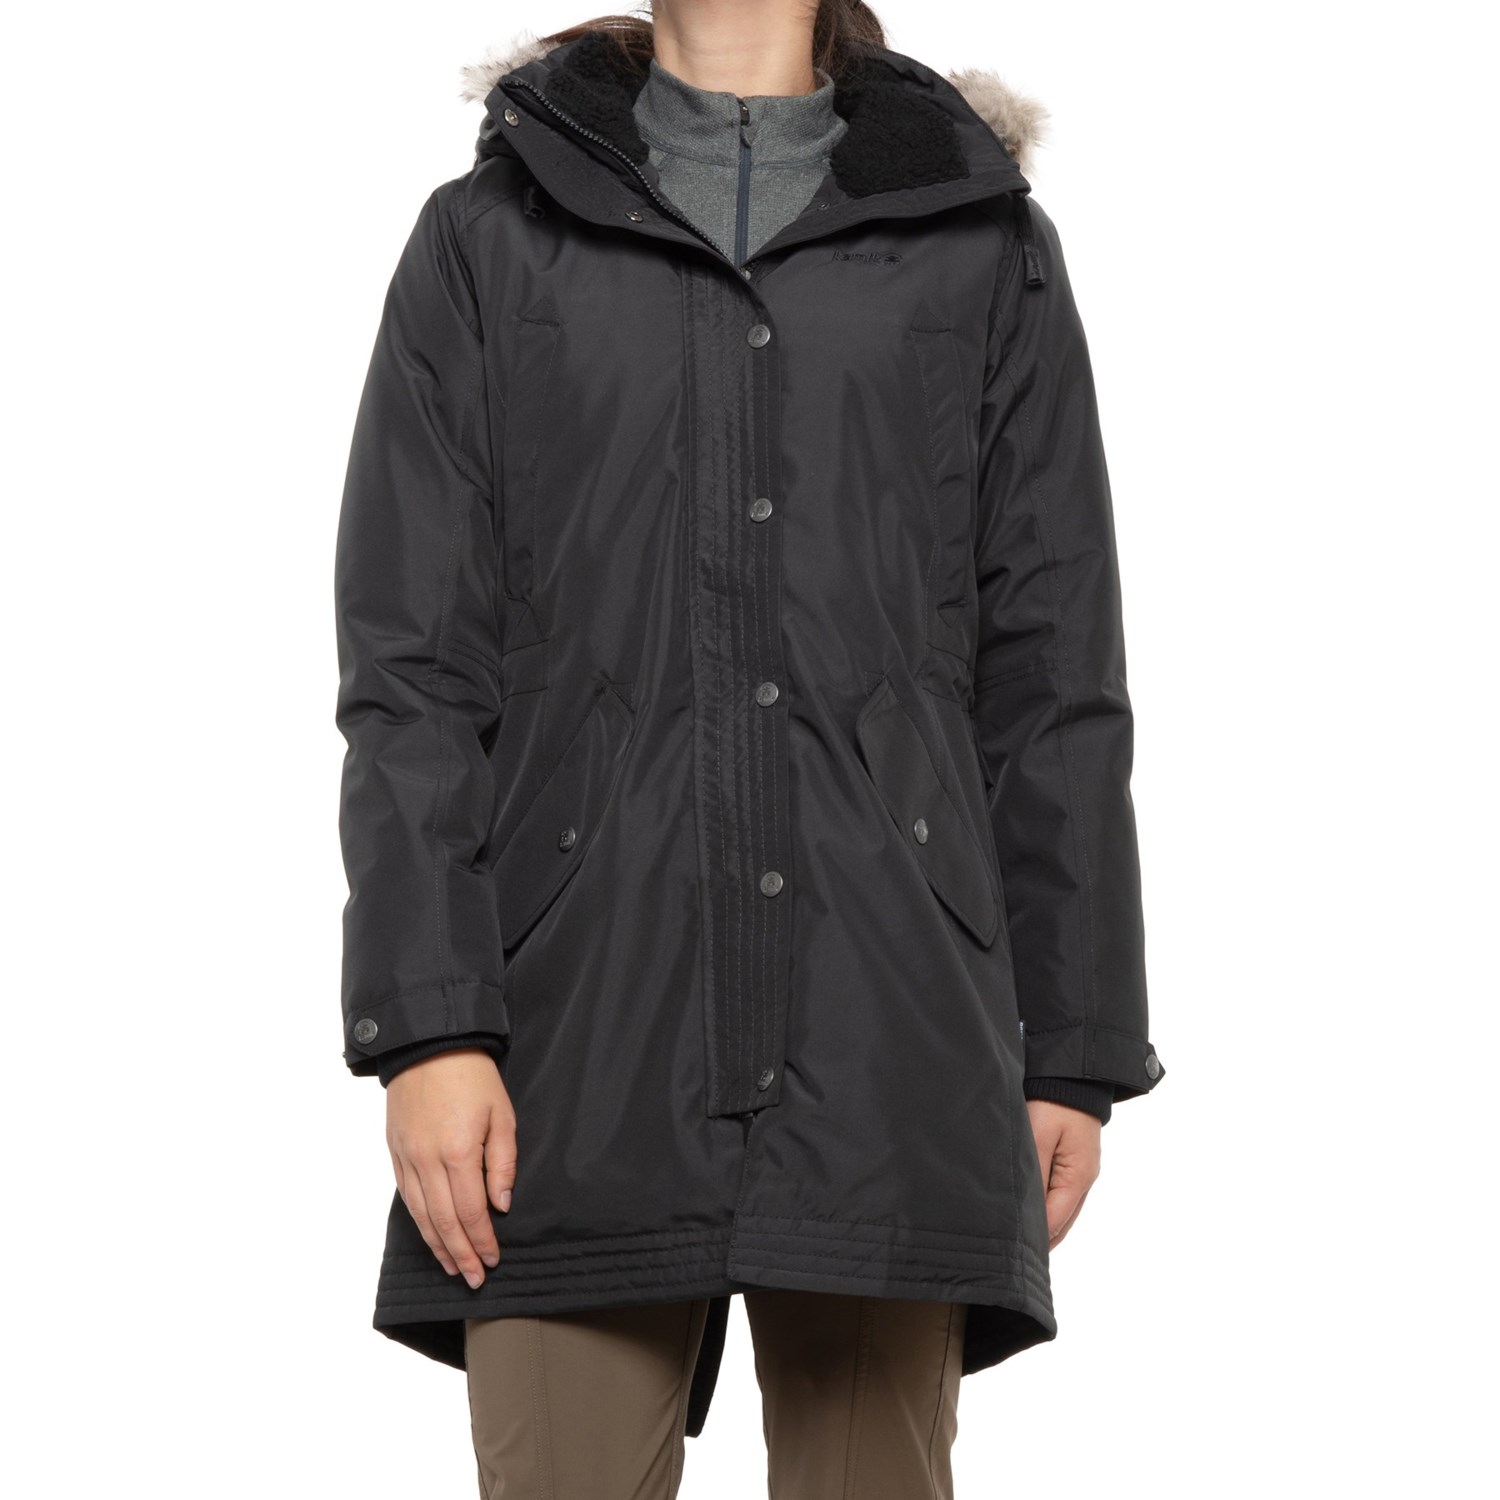 waterproof insulated parka